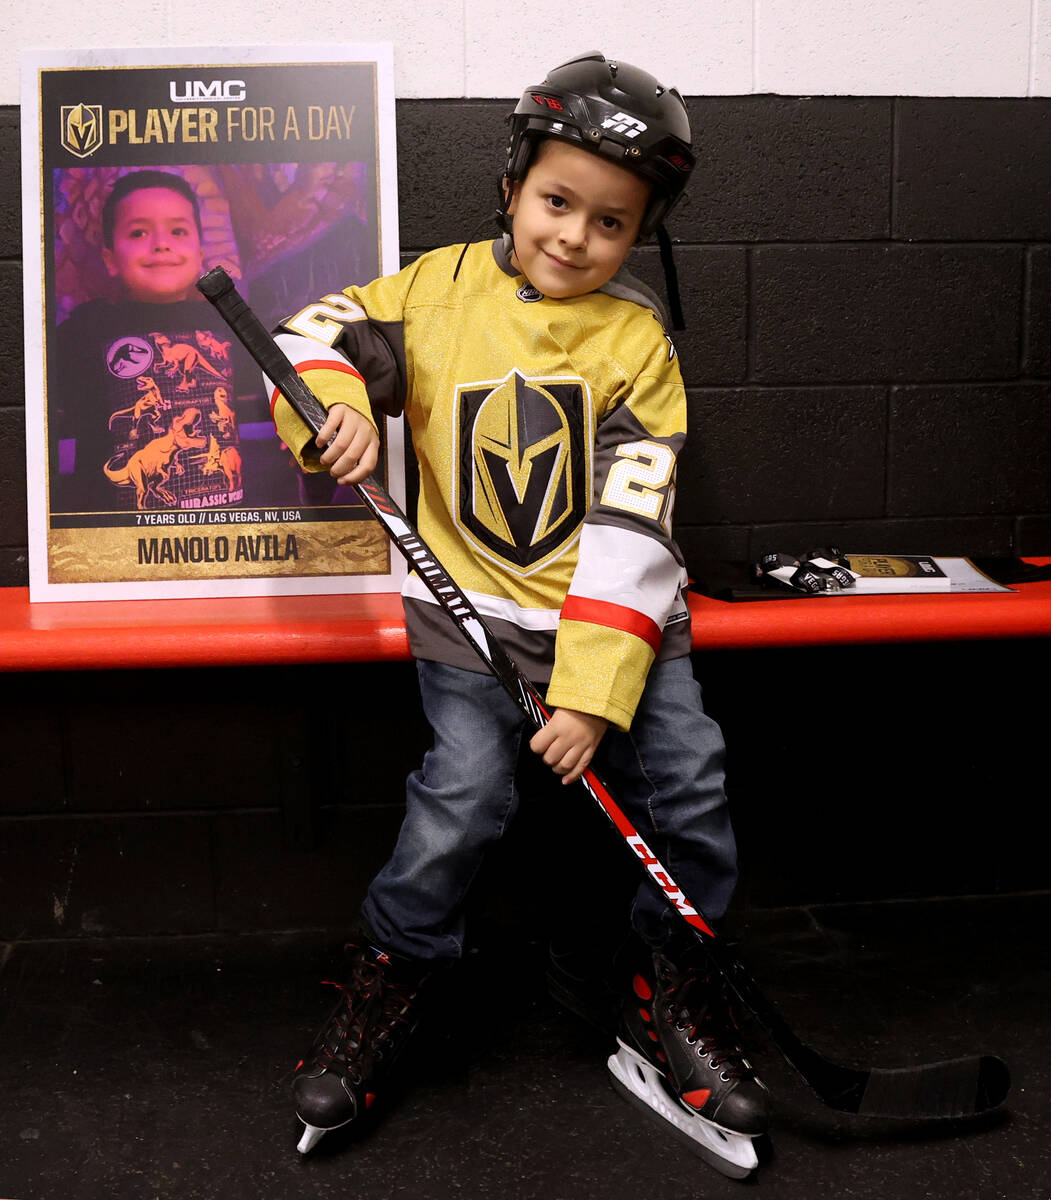 Former UMC Children’s Hospital patient Manolo Avila, 7, gets ready to play during a Vega ...